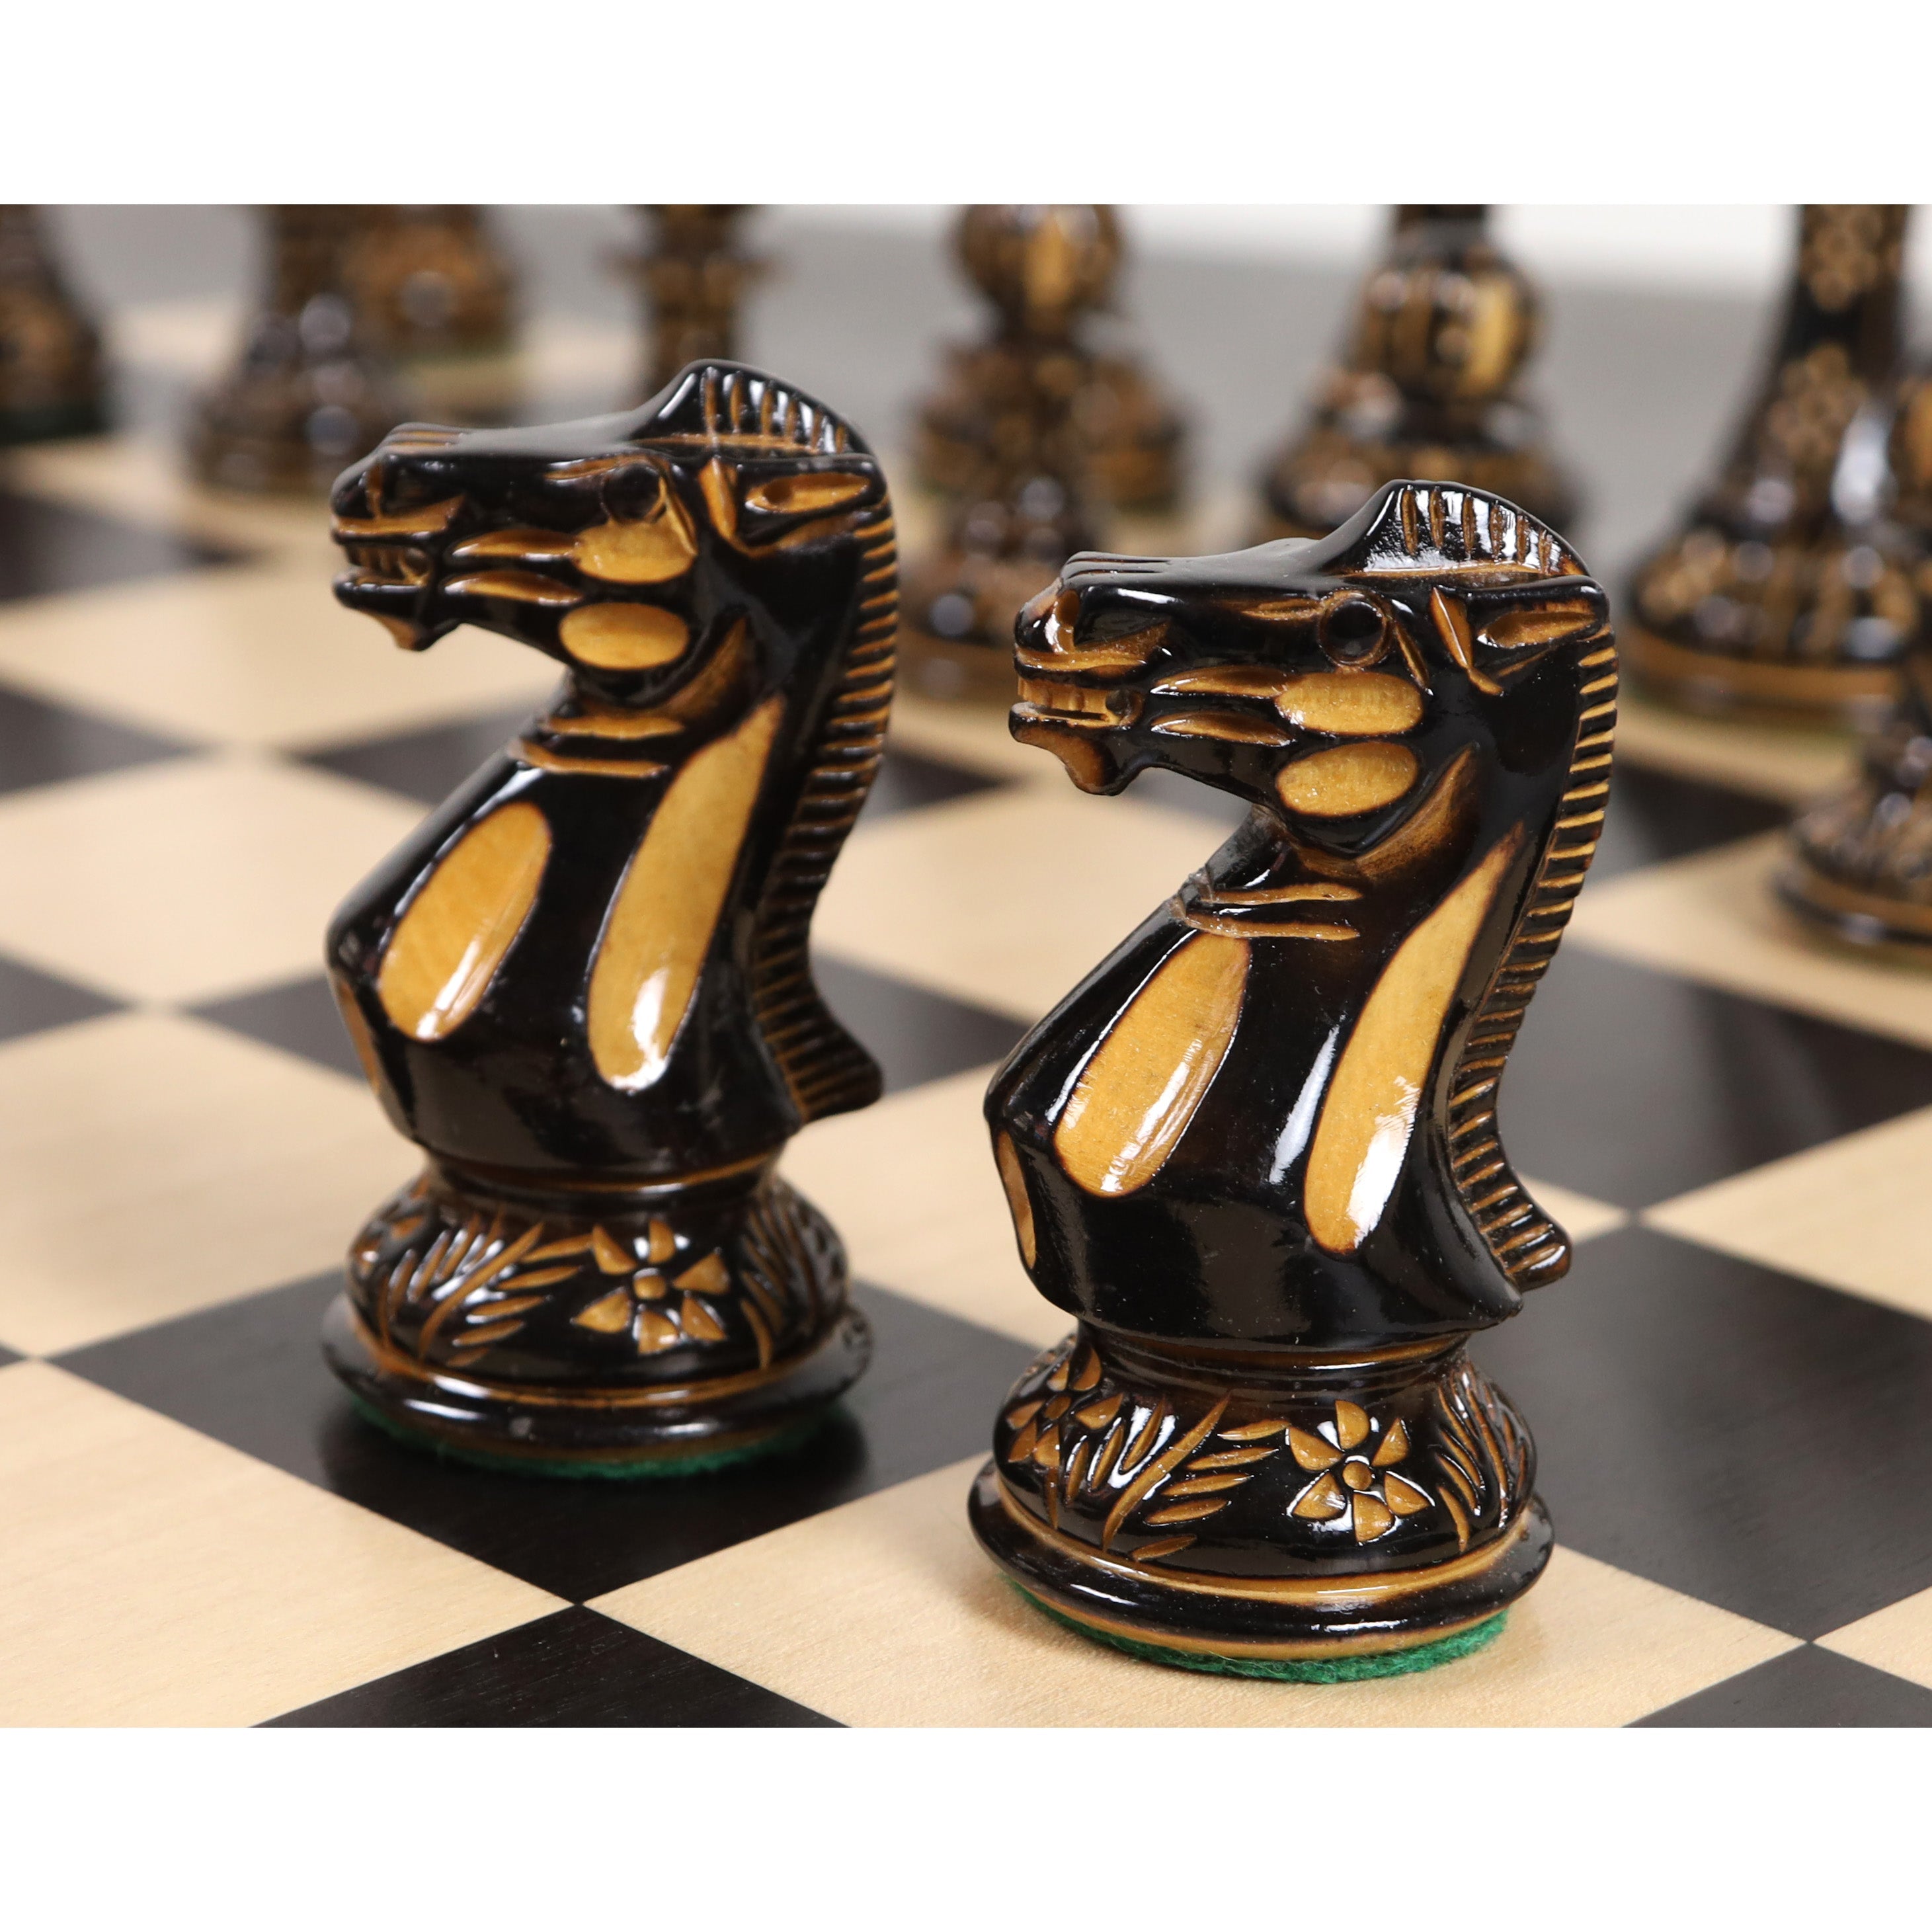 Slightly Imperfect Professional Staunton Hand Carved Chess Pieces Only Set- Gloss finish Boxwood